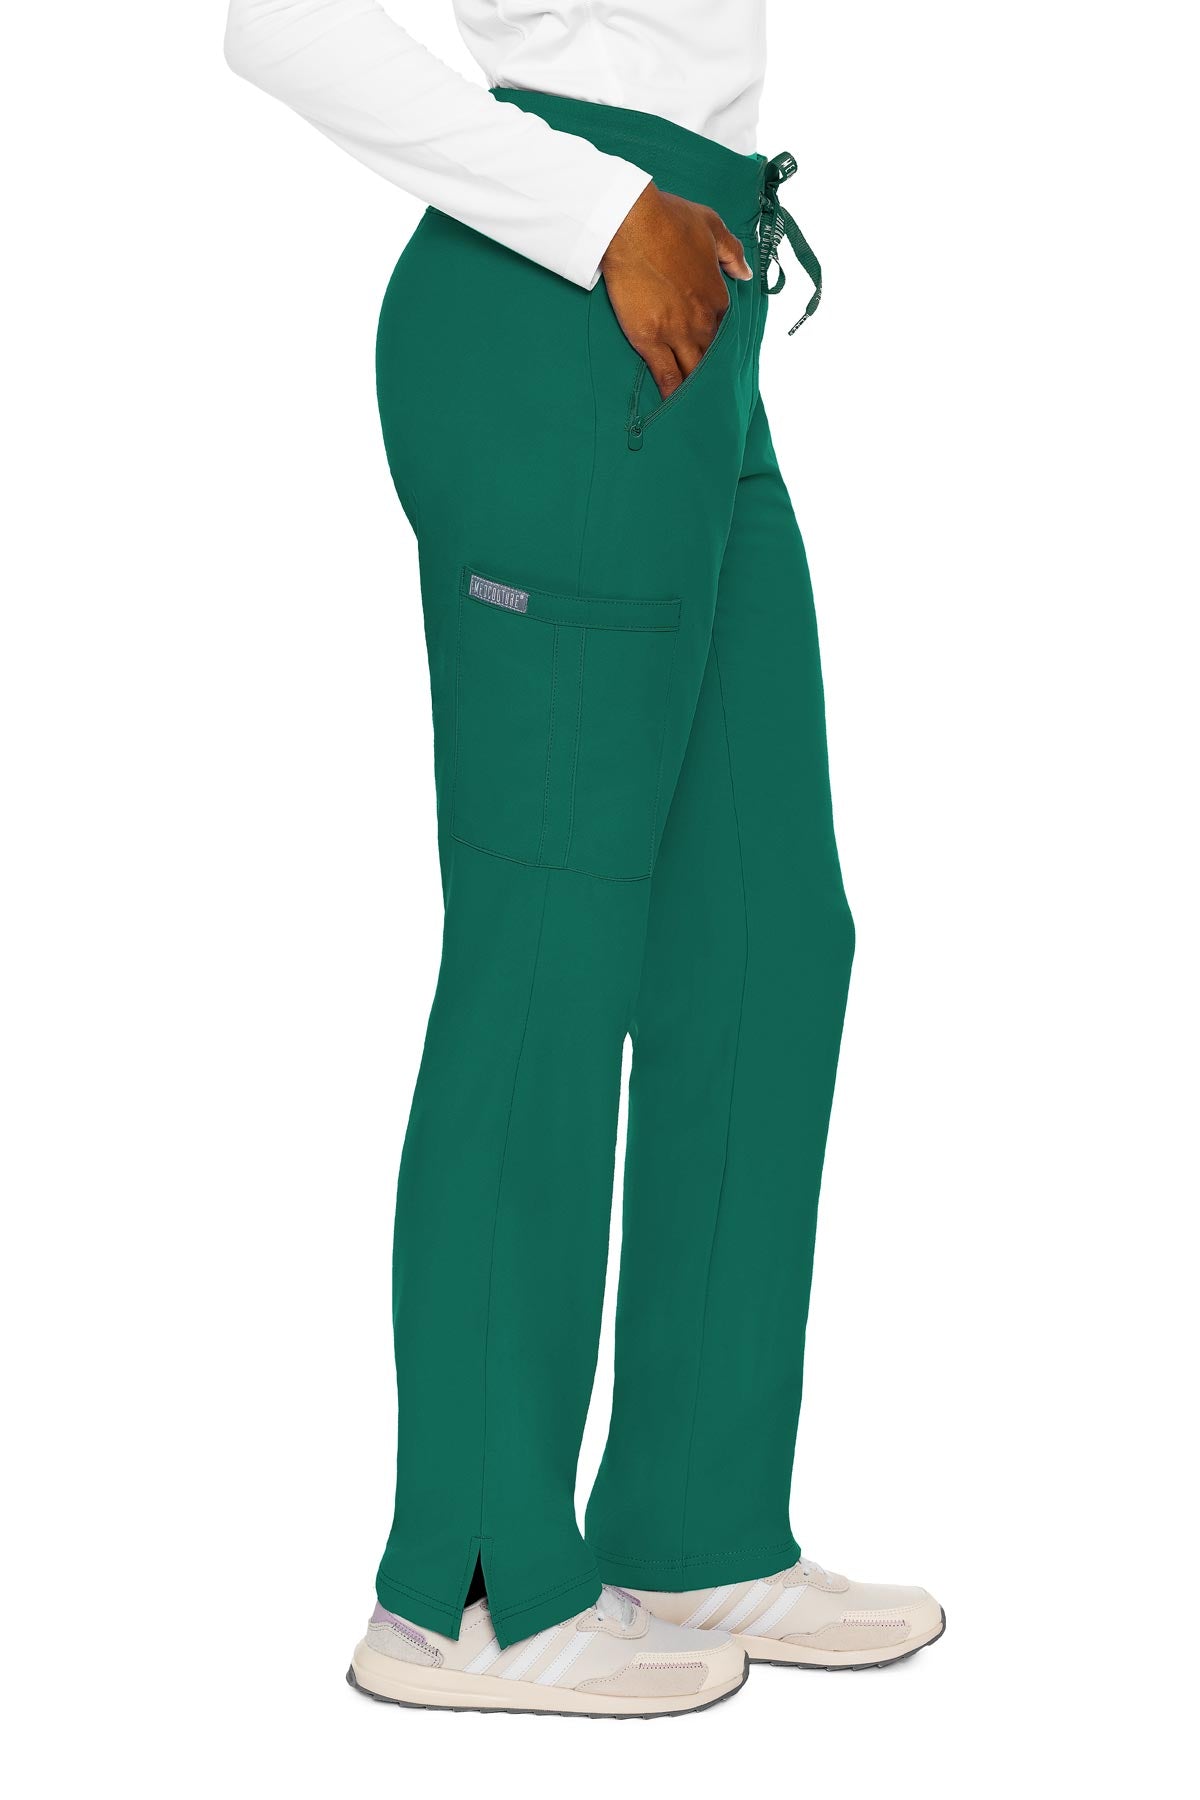 Med Couture 2702 Insight Women's Zipper Pocket Pant - TALL – Valley West  Uniforms